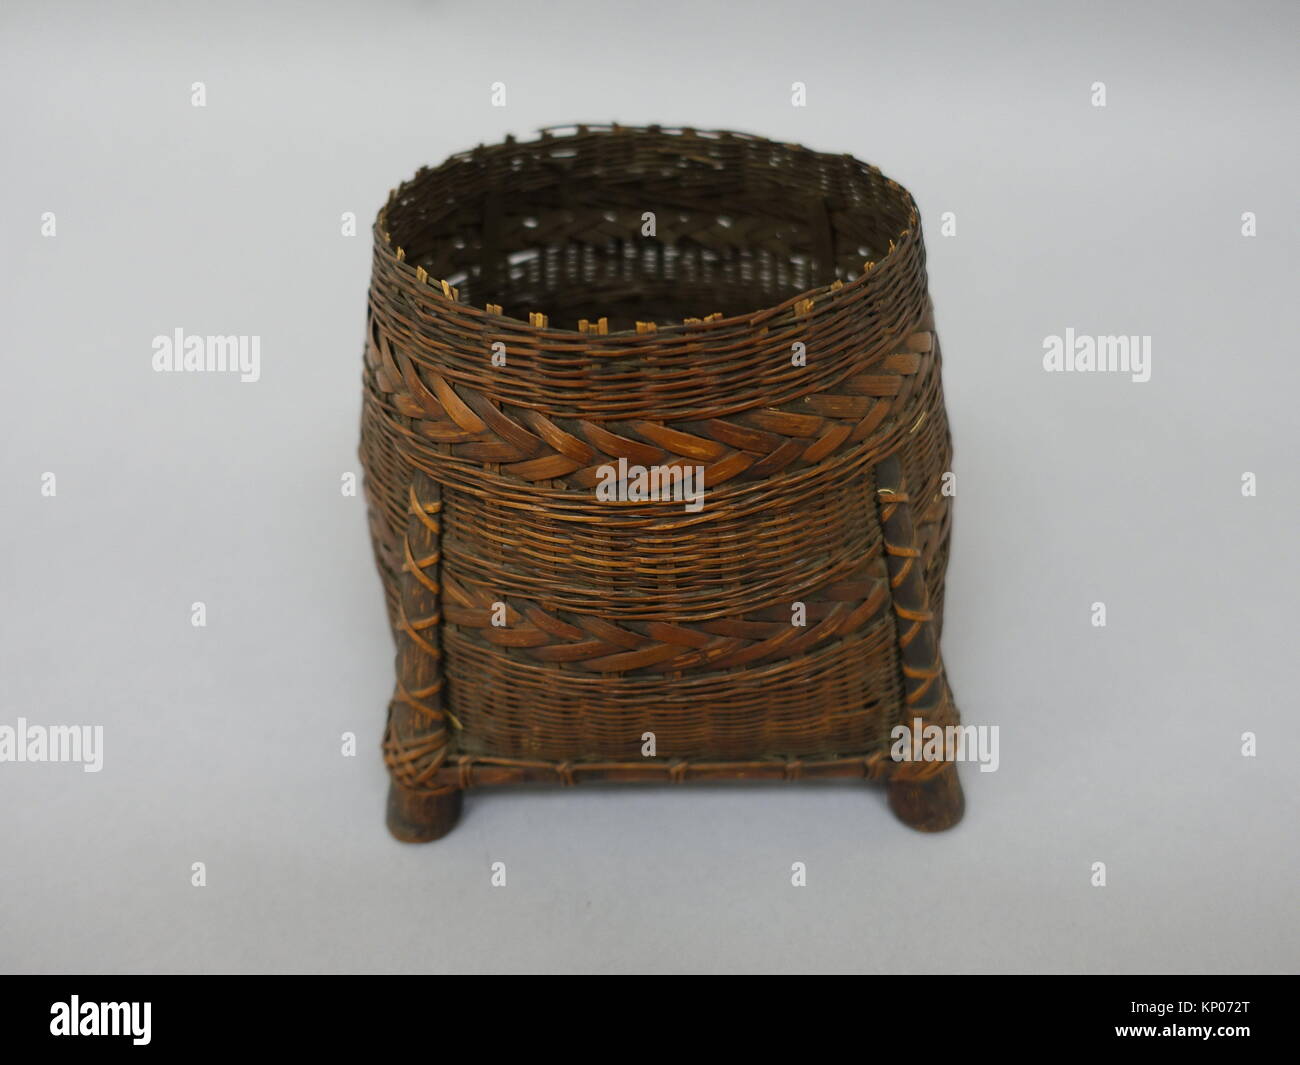 Basket (Lower Part). Date: 19th century; Culture: Japan; Medium: Rattan; Dimensions: H. 5 3/4 in. (14.6 cm); Classification: Basketry Stock Photo